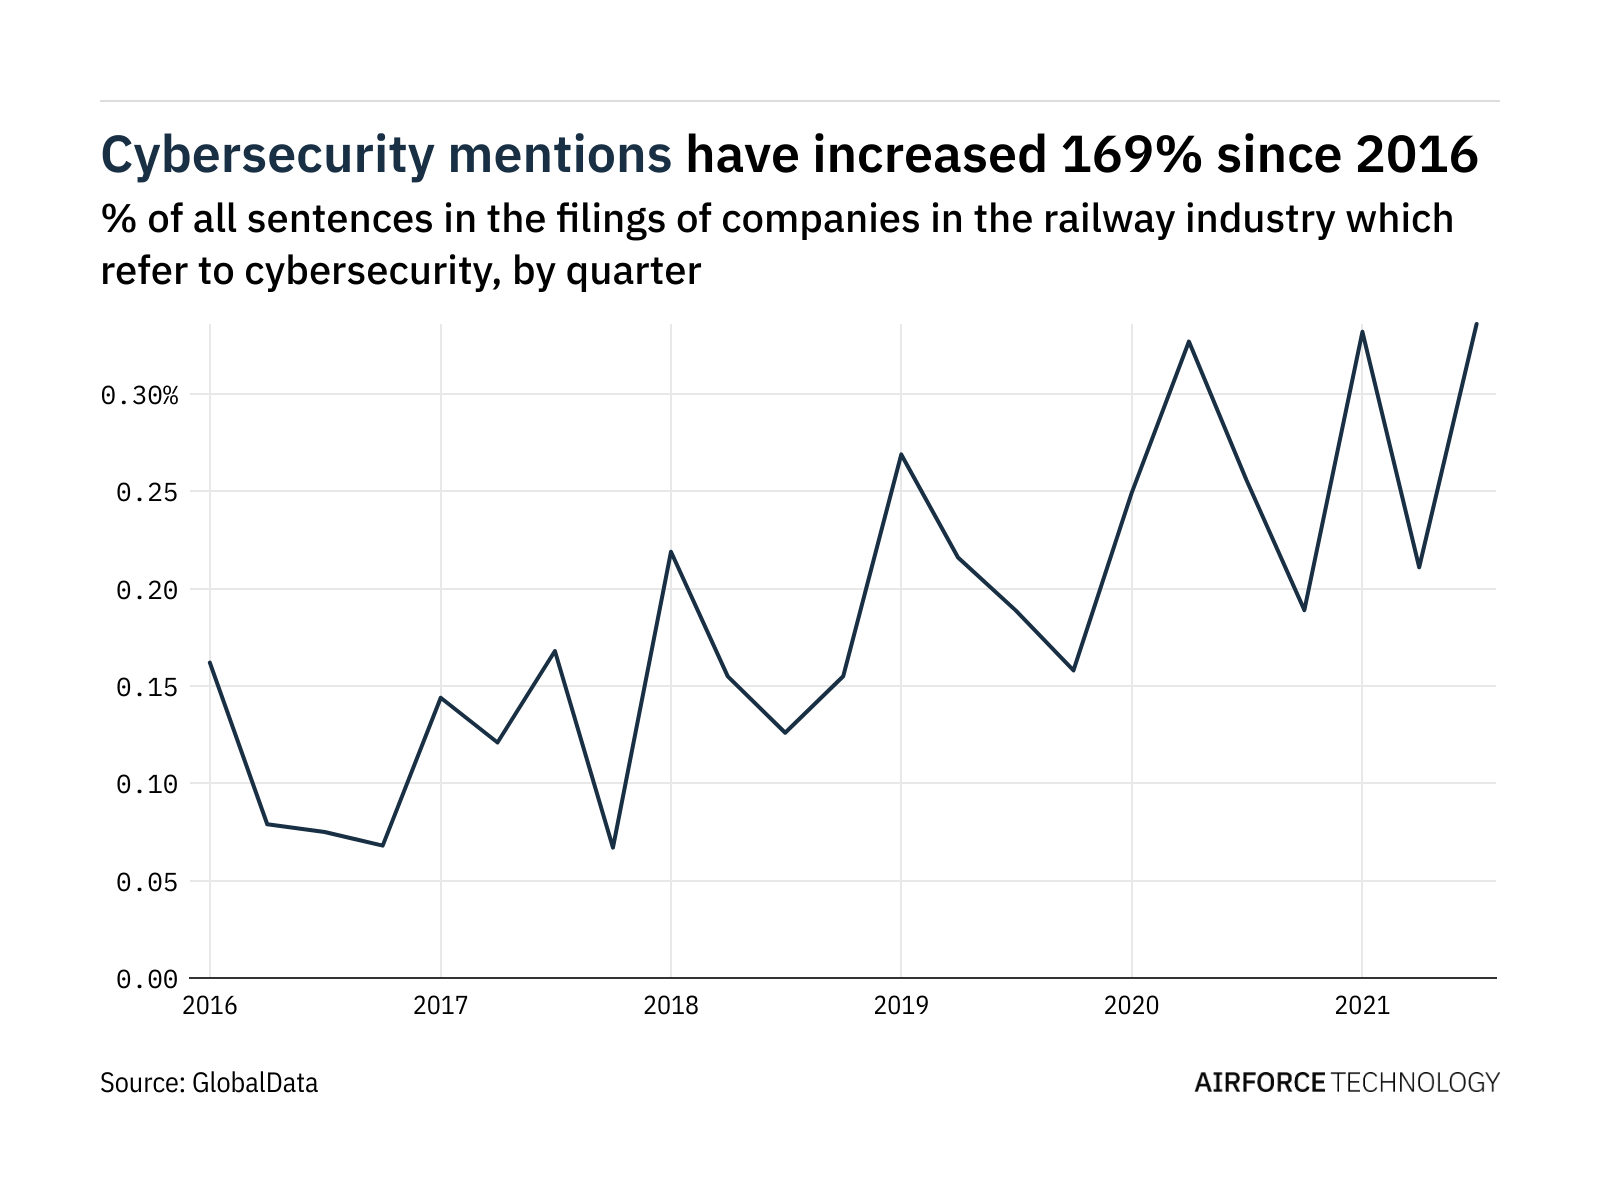 Filings buzz in the railway industry: 59% increase in cybersecurity mentions in Q3 of 2021